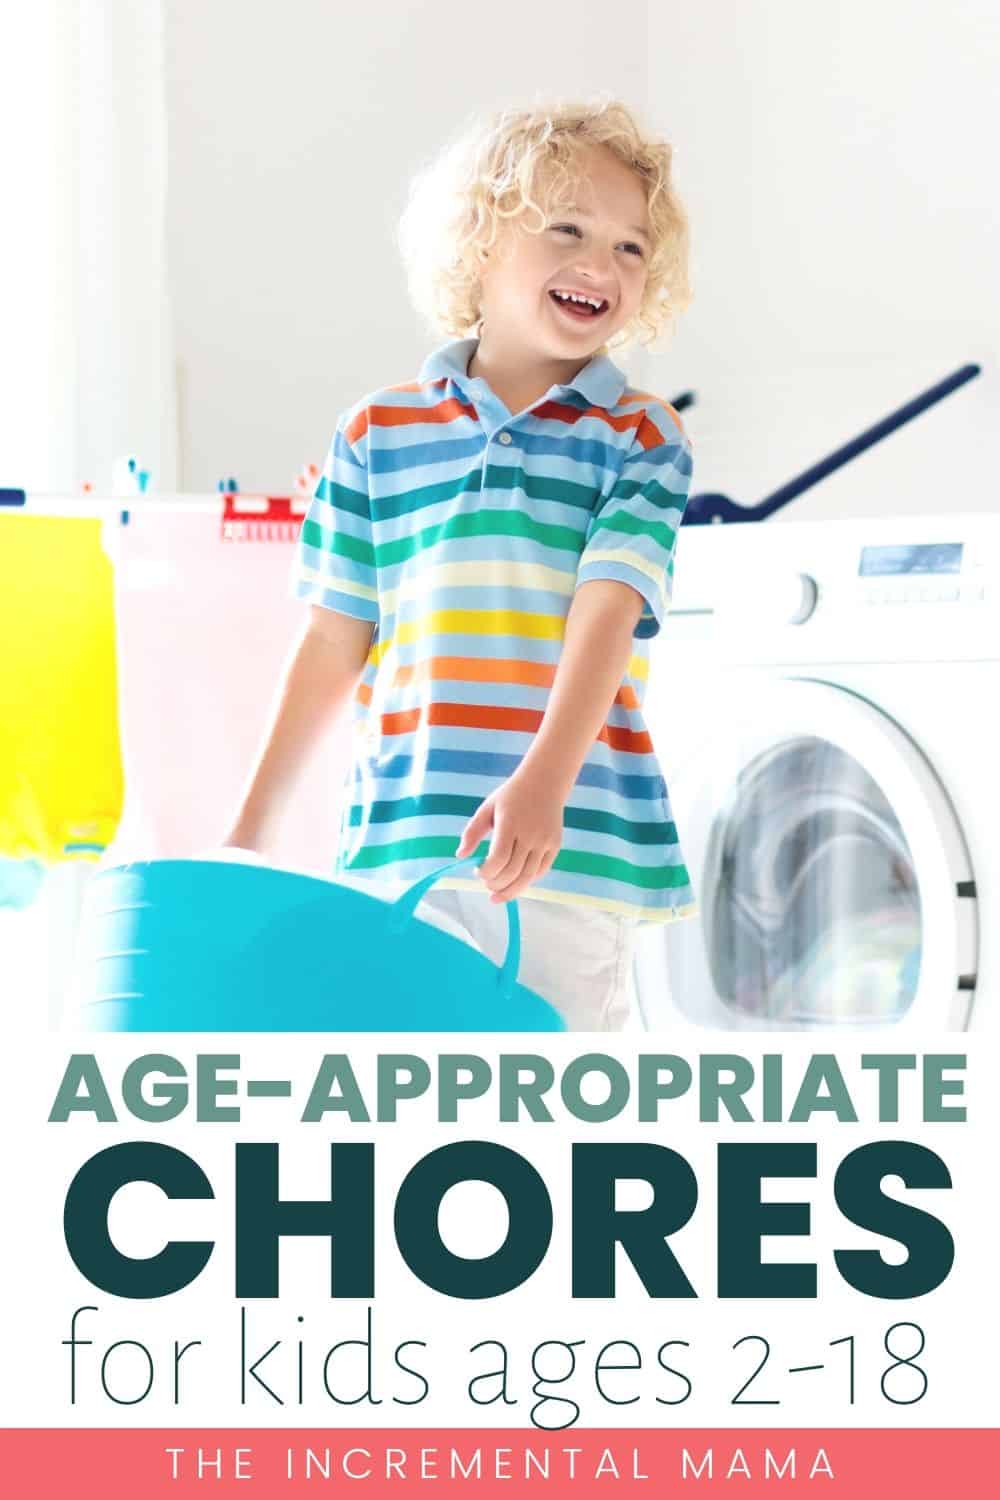 Free printable chore chart by age